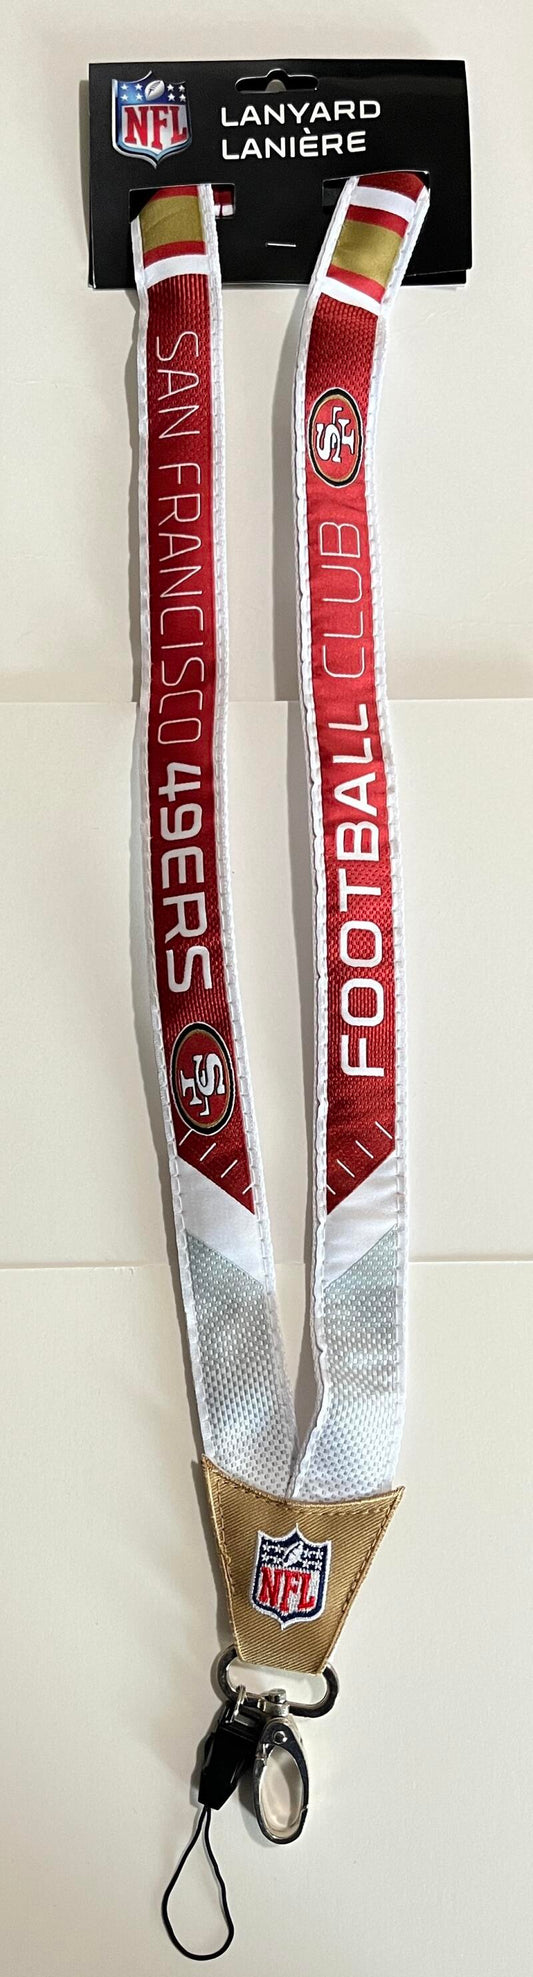 San Francisco 49ers Woven Licensed NFL Football Lanyard Metal Clasp Image 1